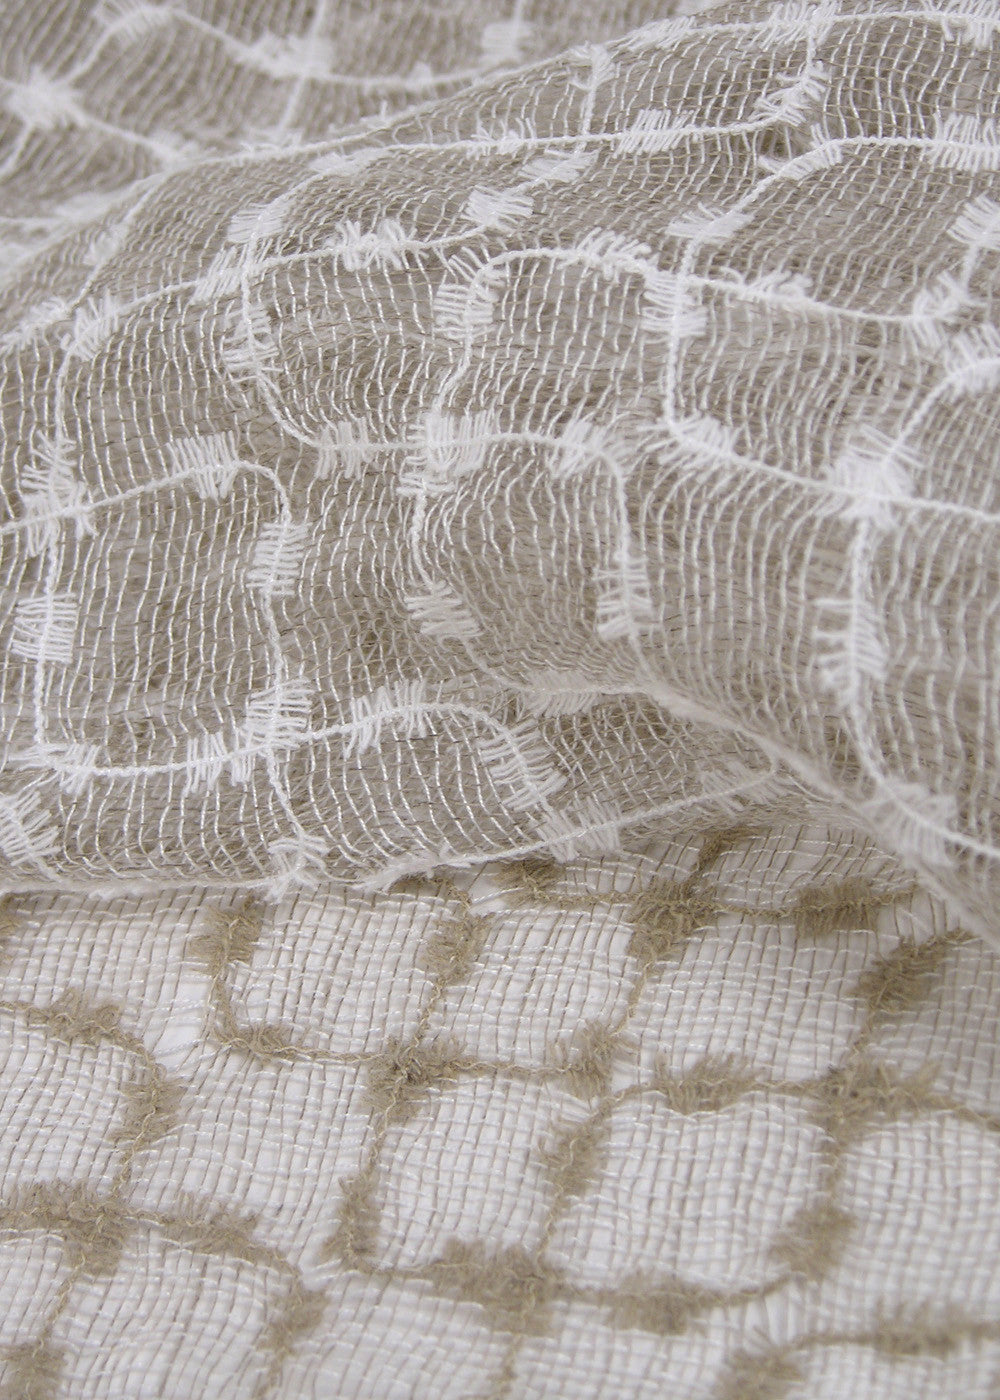 close up of a sheer linen fabric with a unique mesh-like weave